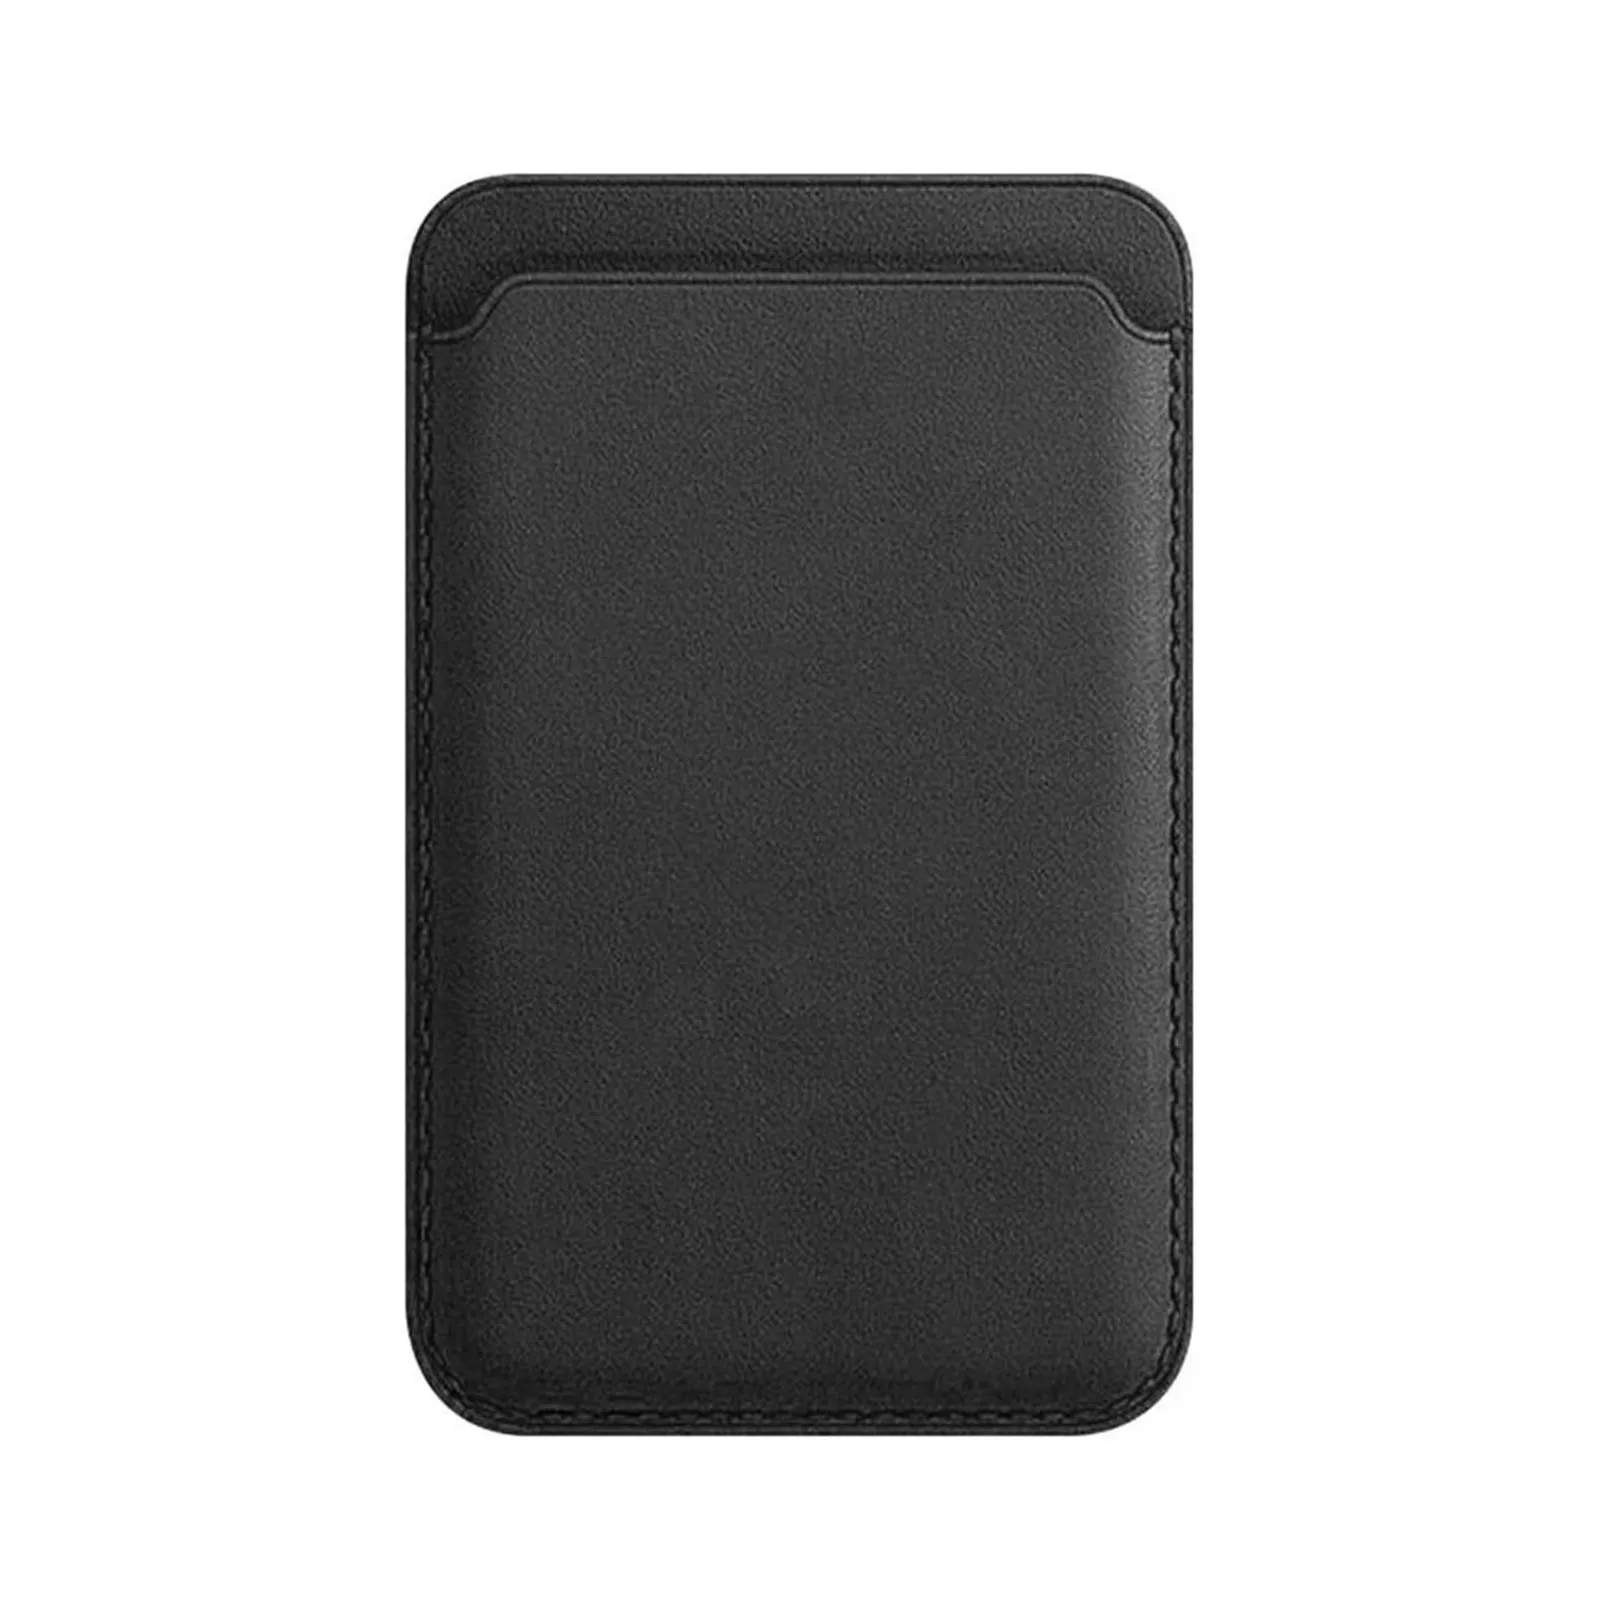 HOT SALE! Card Bag Rfid Blocking Magsafing Genuine PU Leather Wallet Mobile Phone Card Holder Wallet For Iphone 12 Pro Max Mini